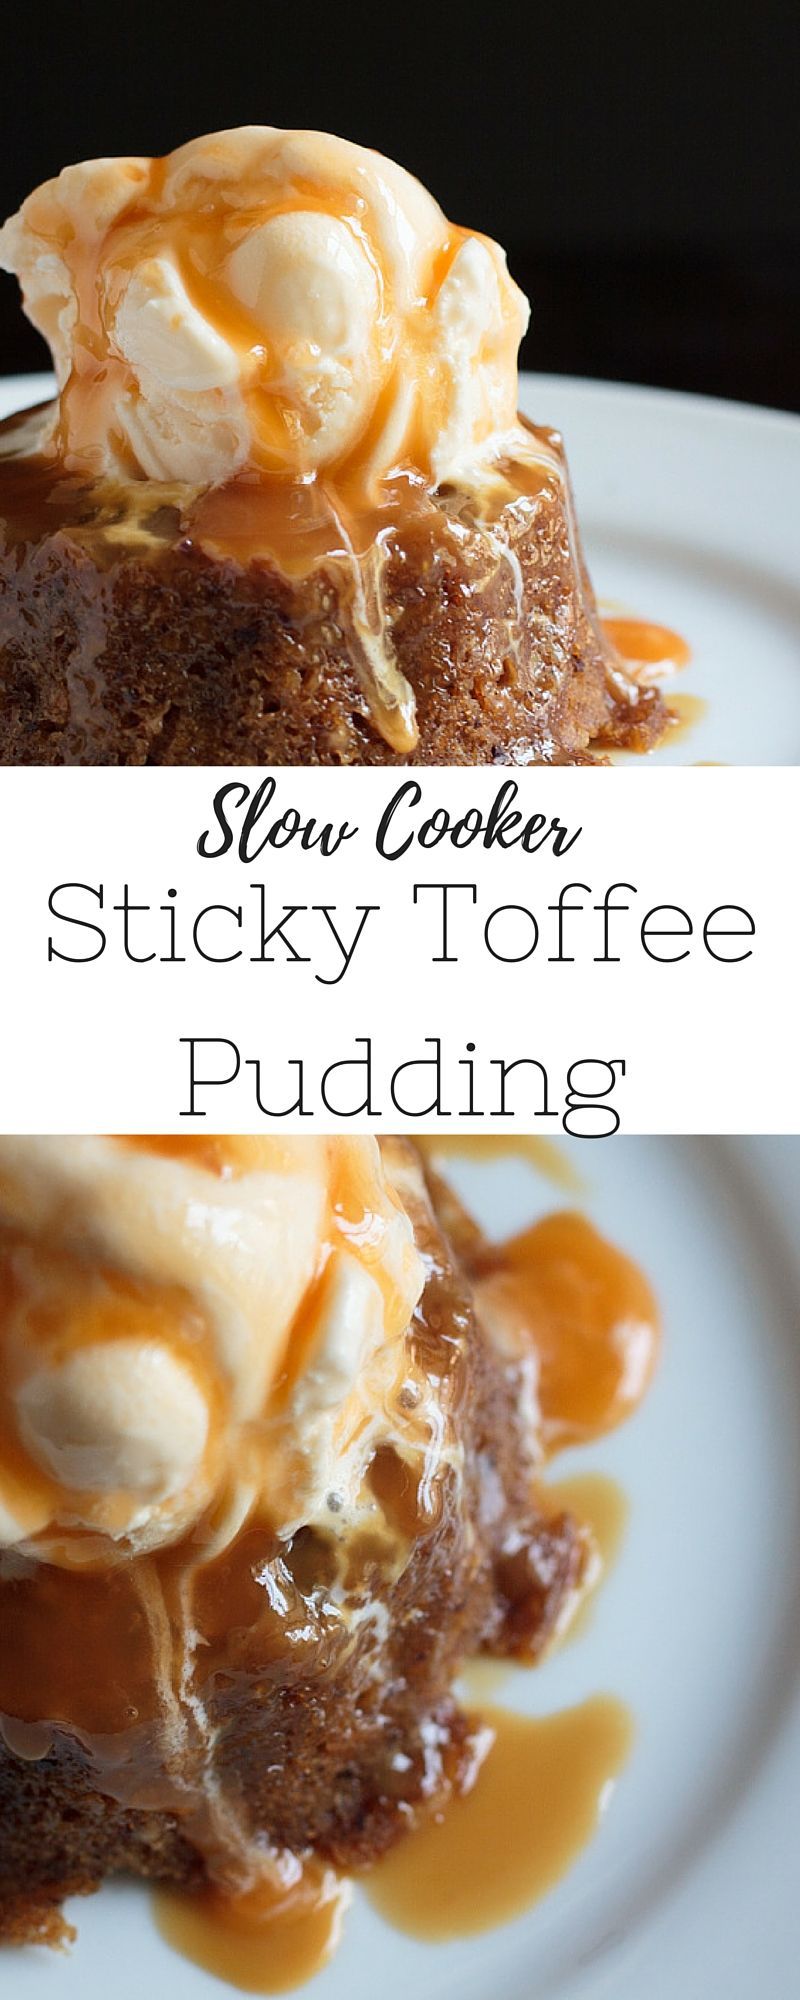 Slow Cooker Sticky Toffee Pudding -   16 slow cooker desserts
 ideas